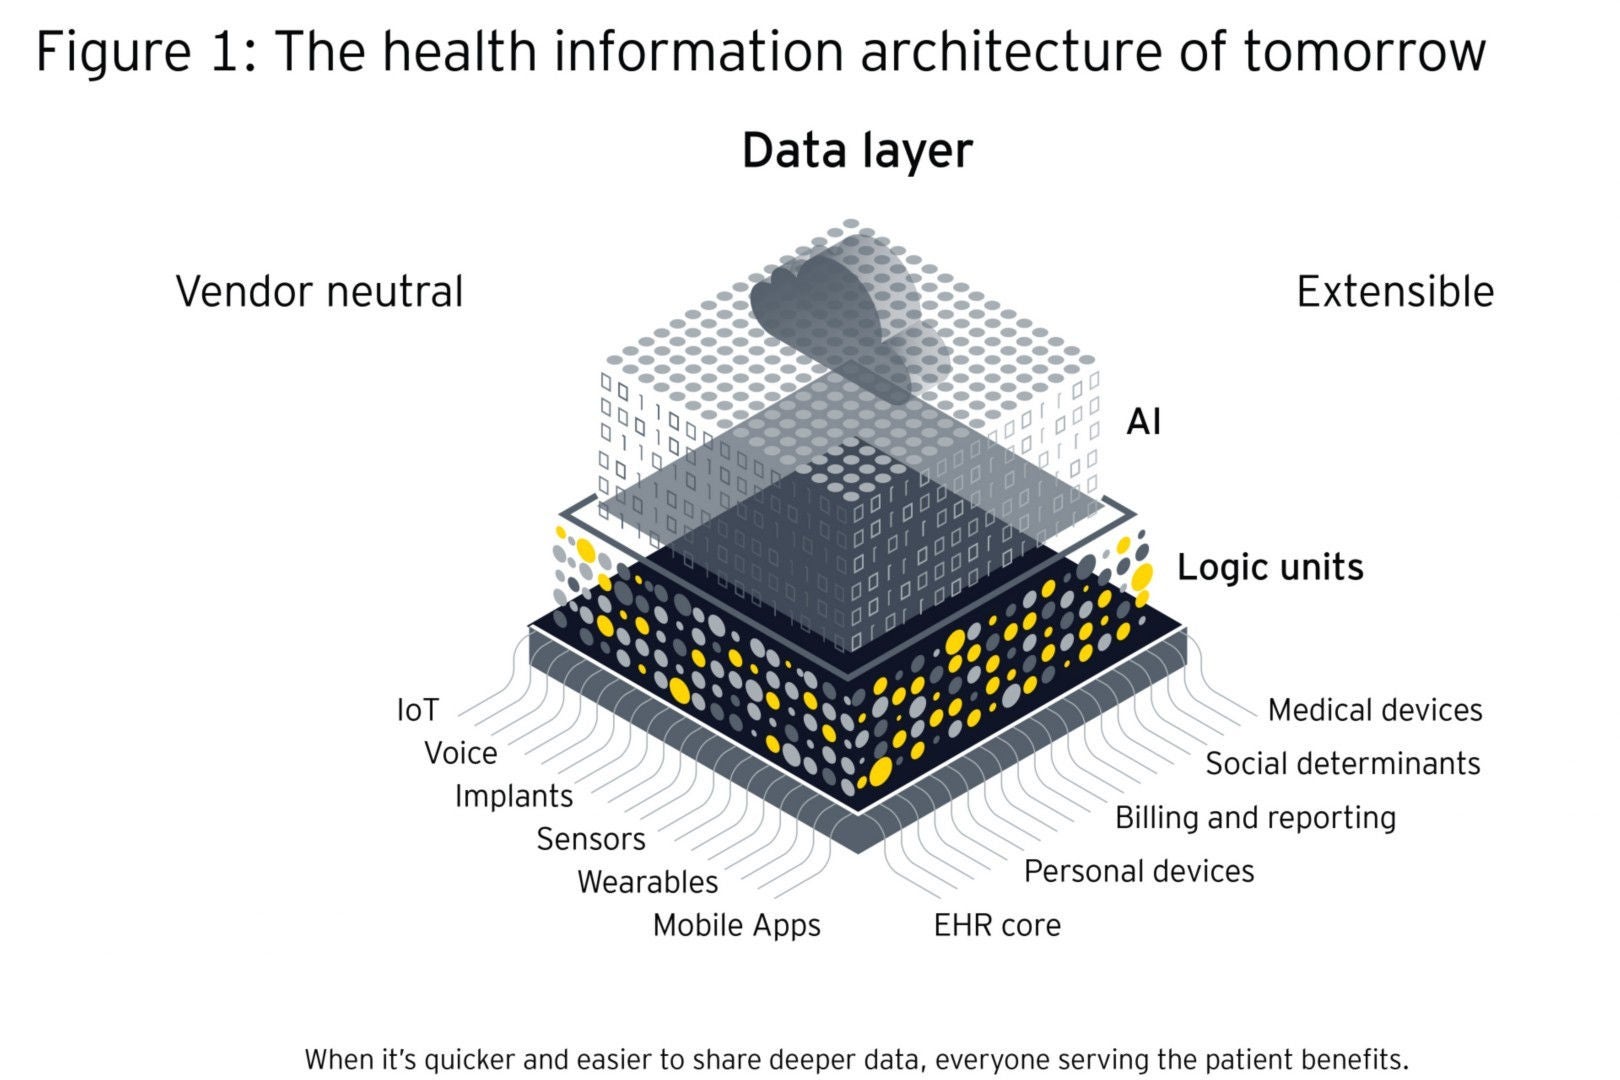 The health information architecture of tomorrow